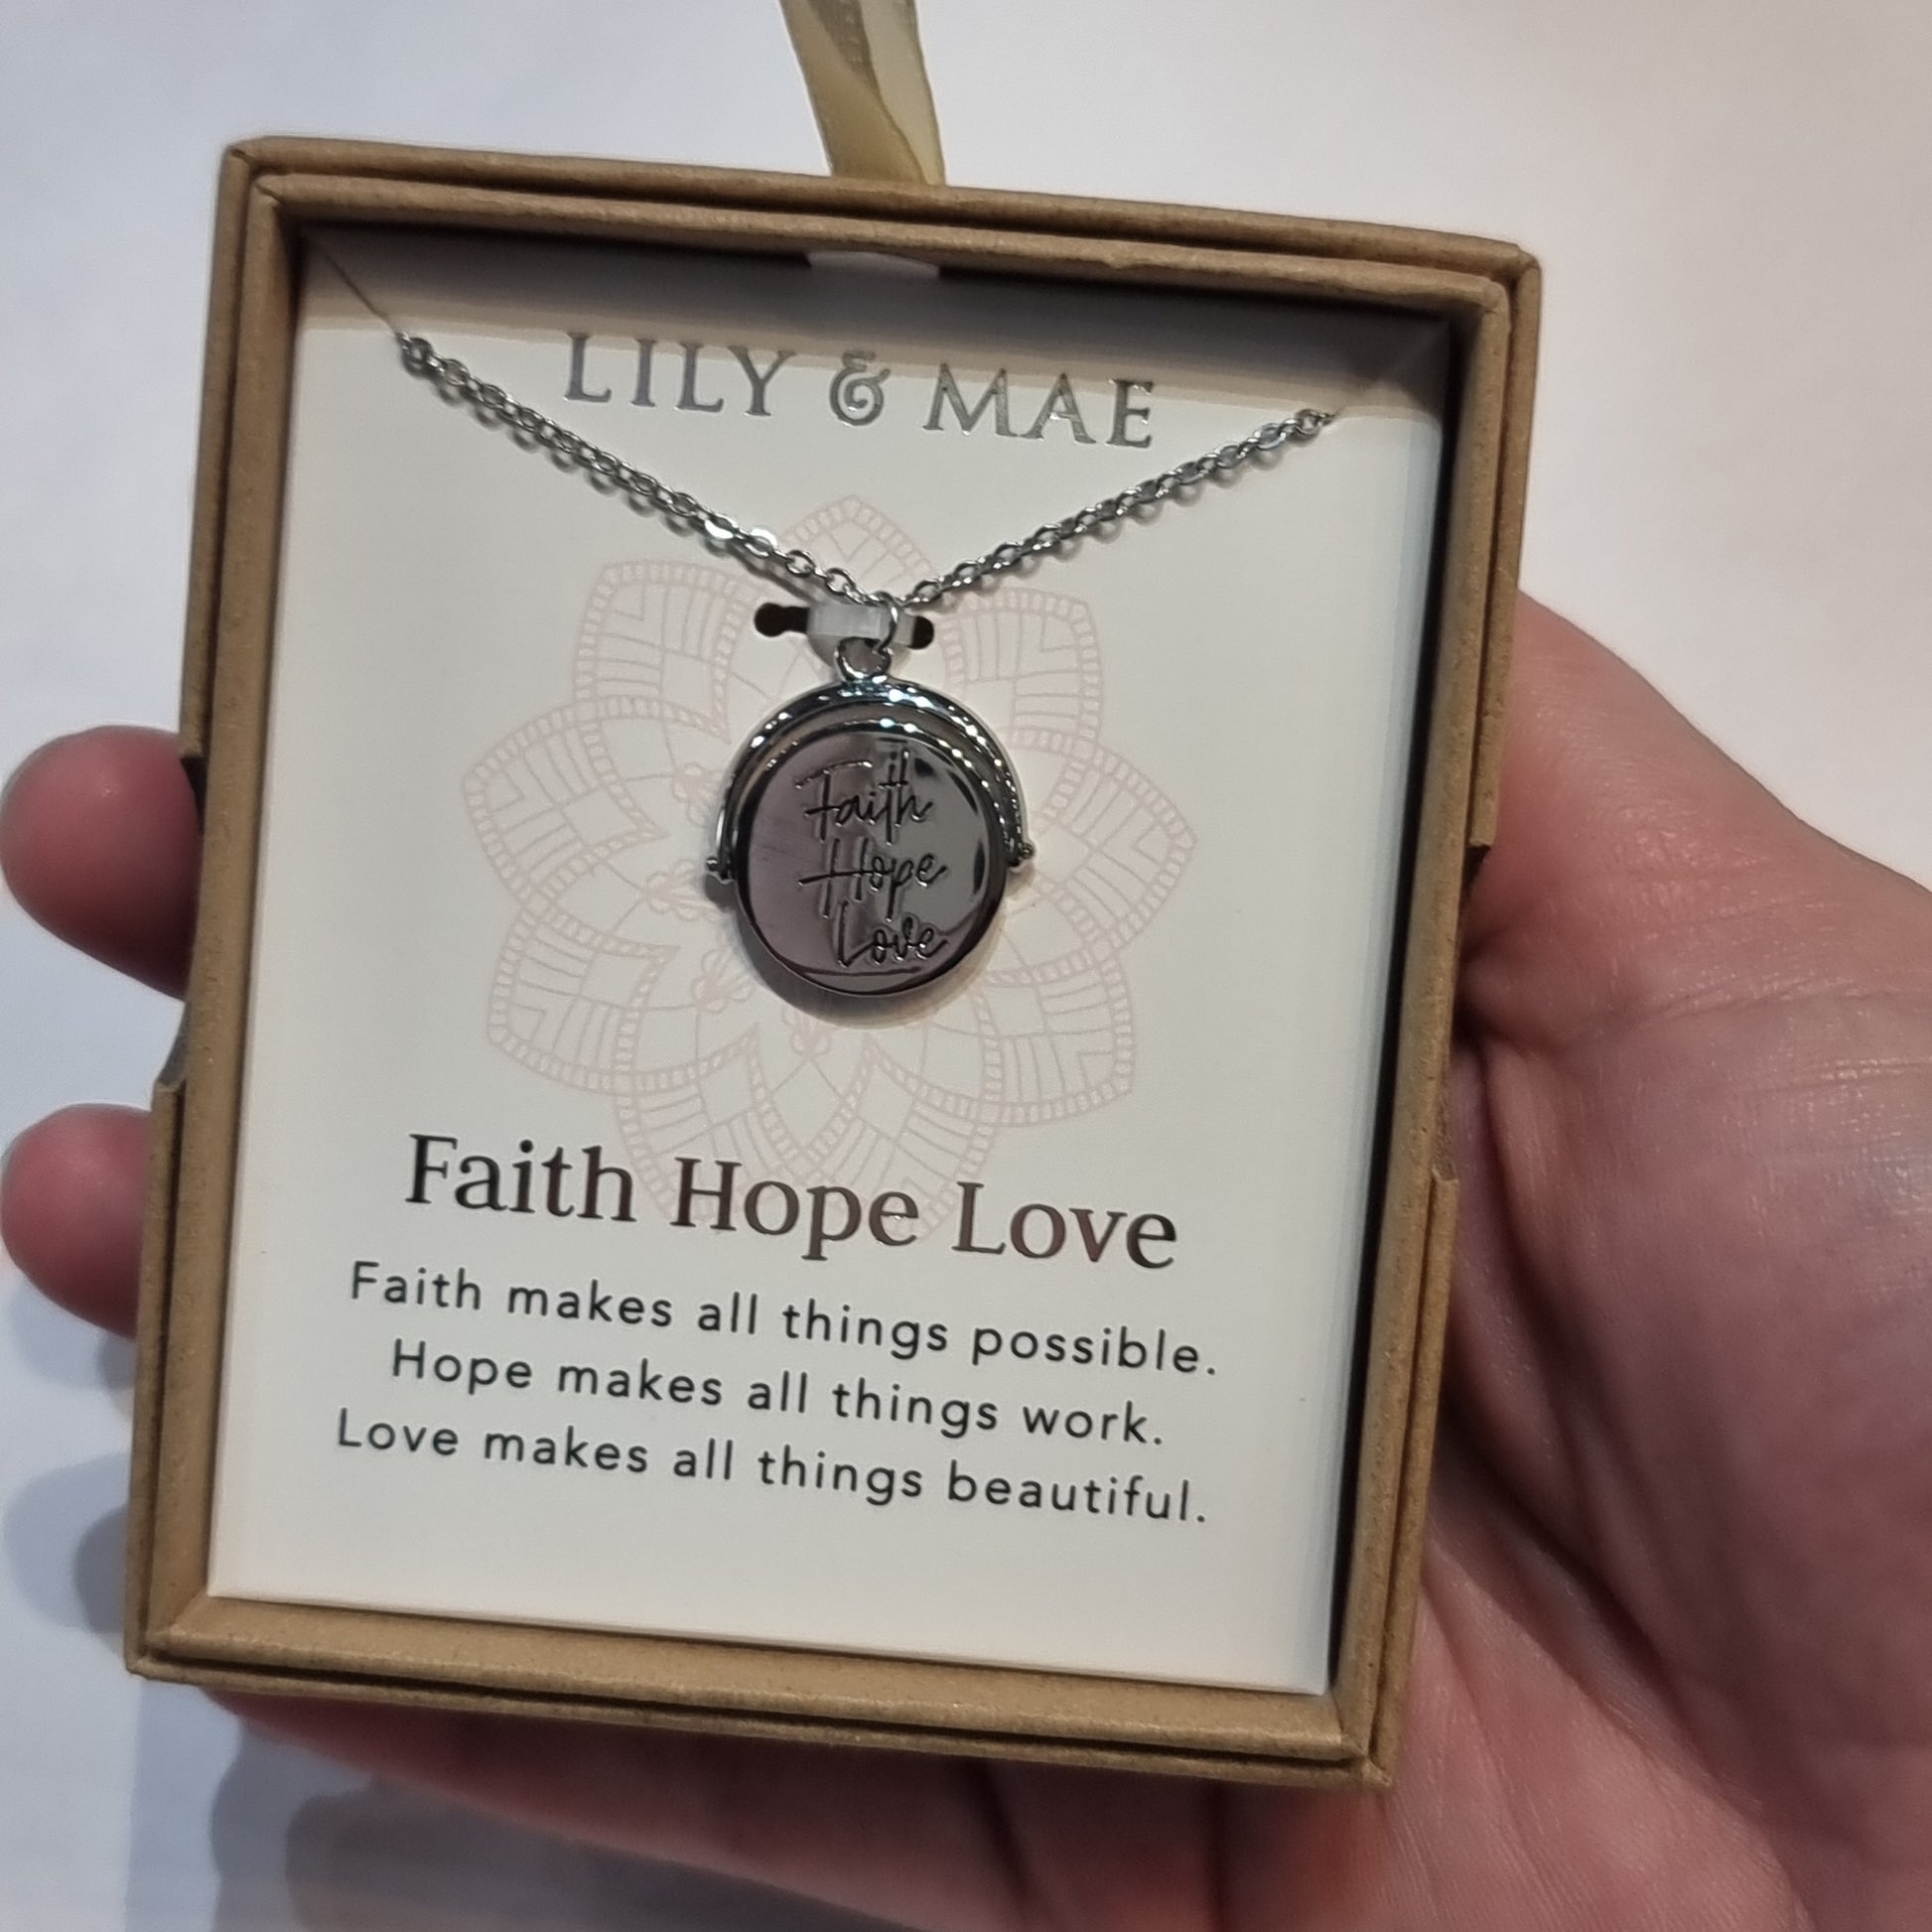 L&M spinning necklace - Faith Hope Love - Rivendell Shop